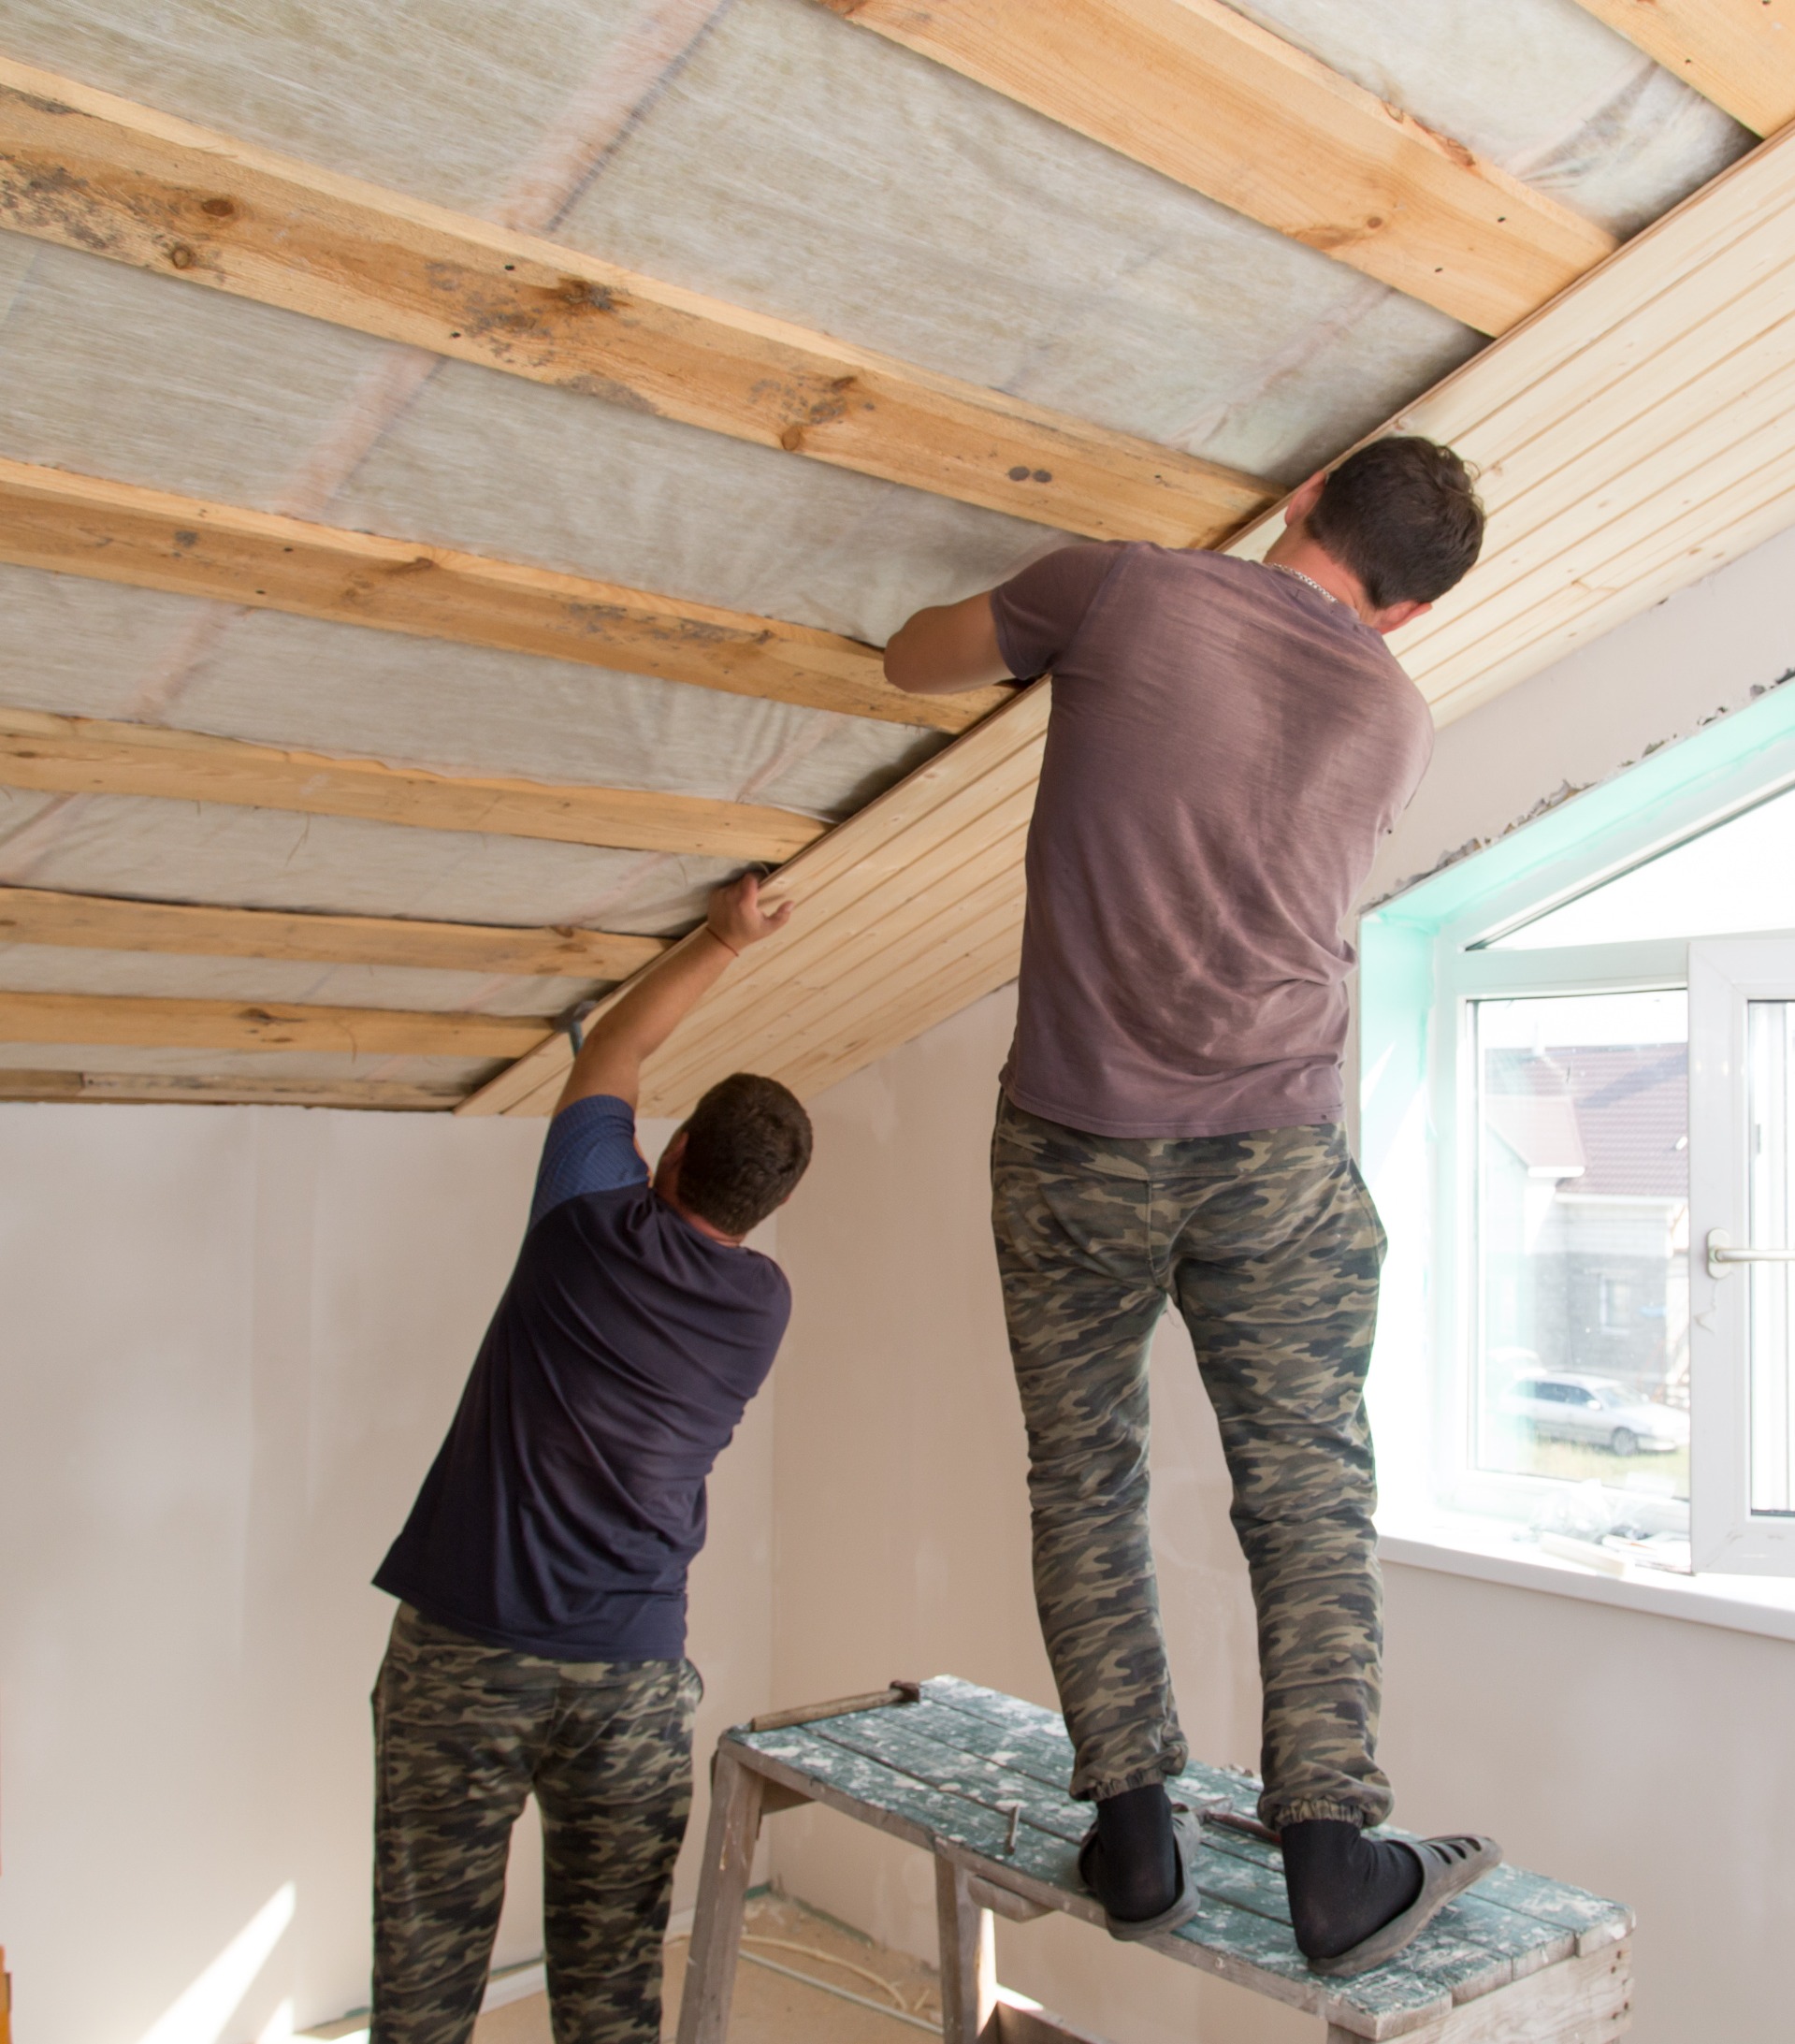 Workers installing attic insultion